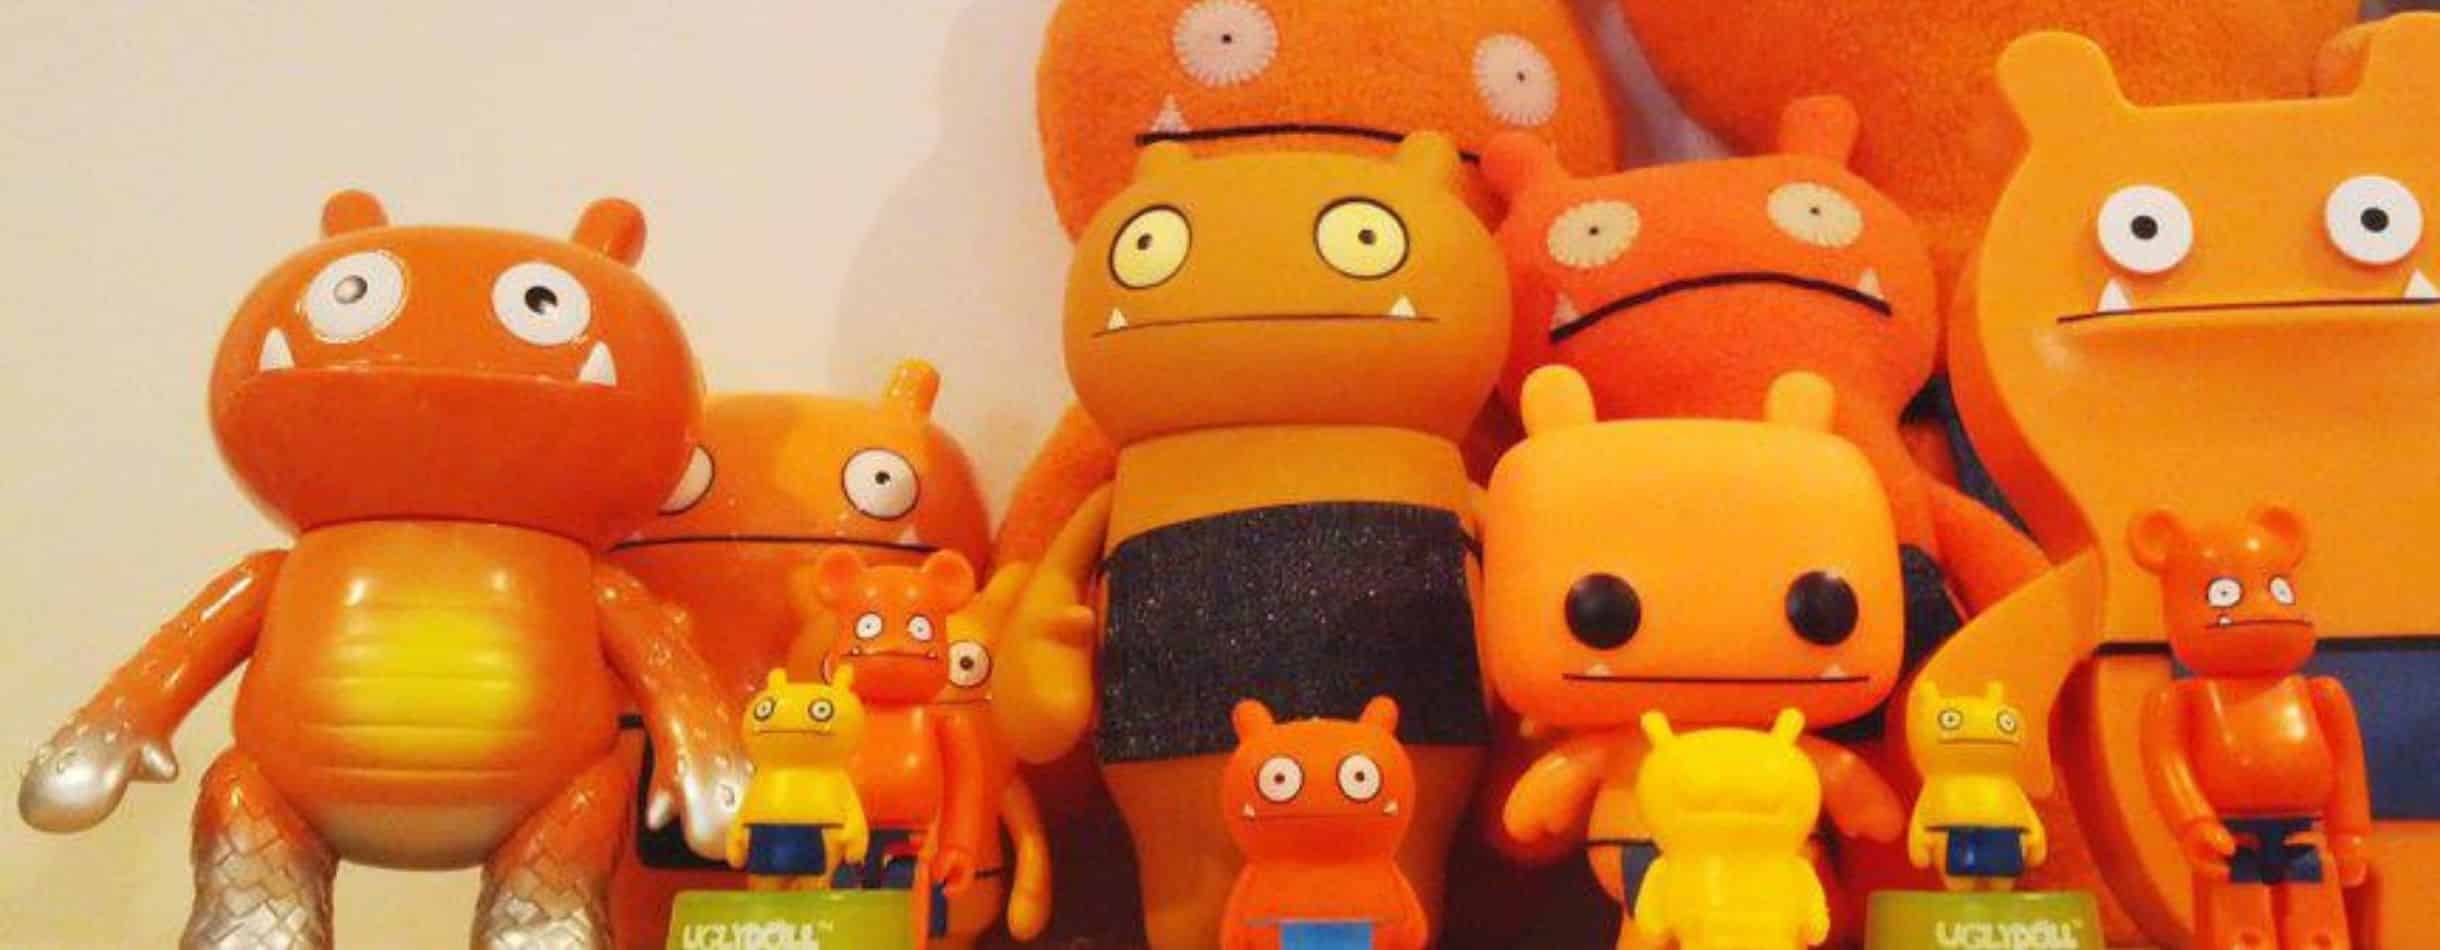 14 orange dolls sit on a shelf with unblinking eyes, awkward frowns, and a general unpleasantness to them.